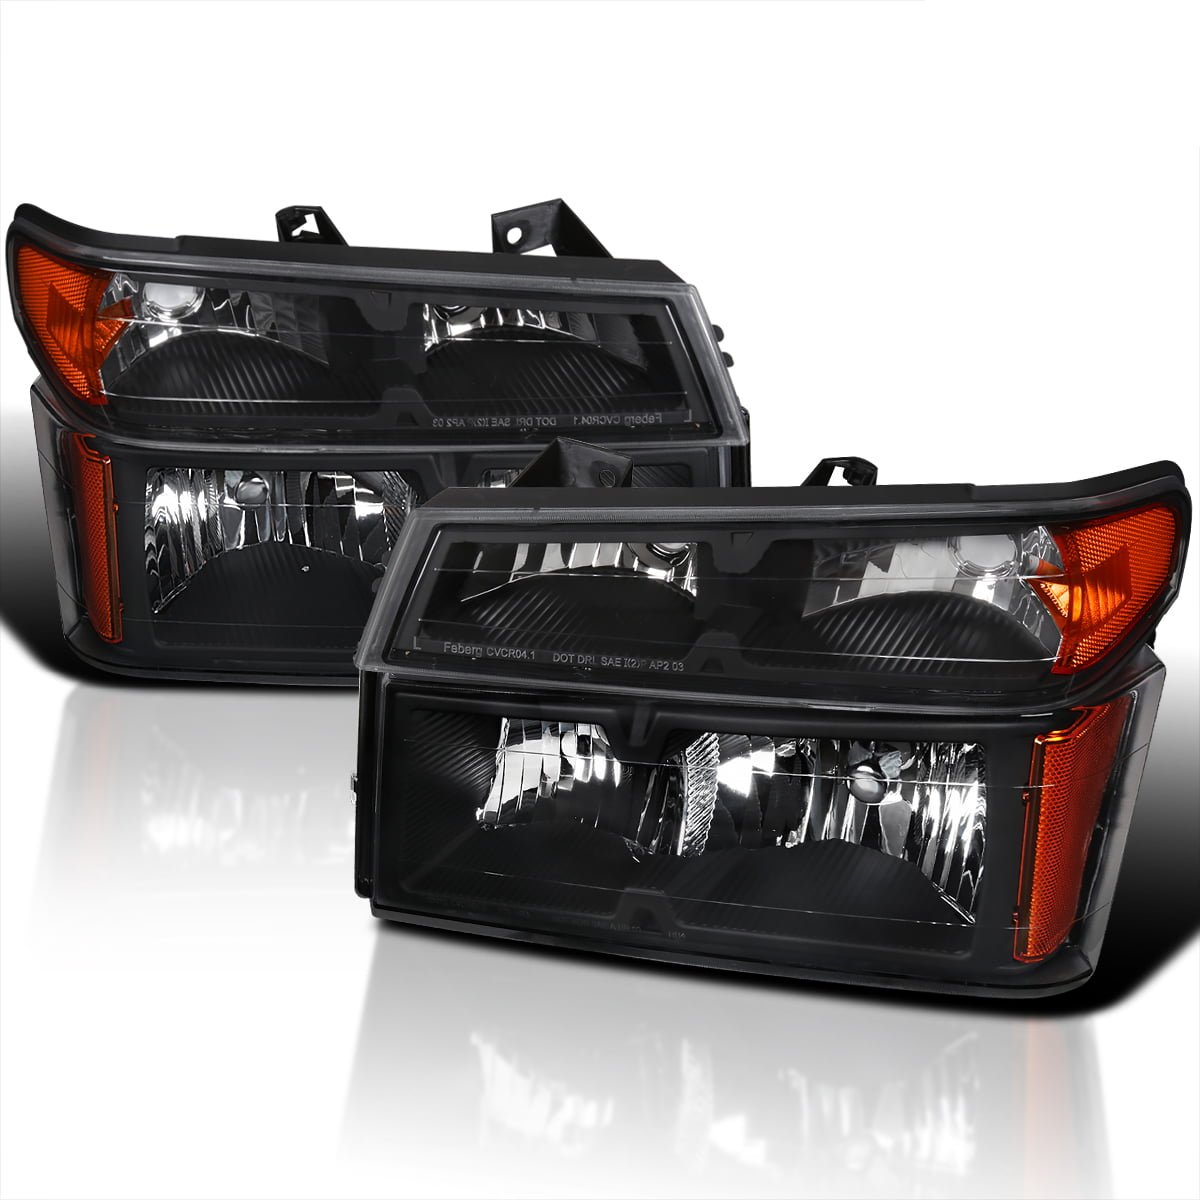 Tail Lights & Park Signal Lamps Compatible with 2004-2012 Colorado Canyon Pickup Truck Replacement 6 Pc Set Headlights 